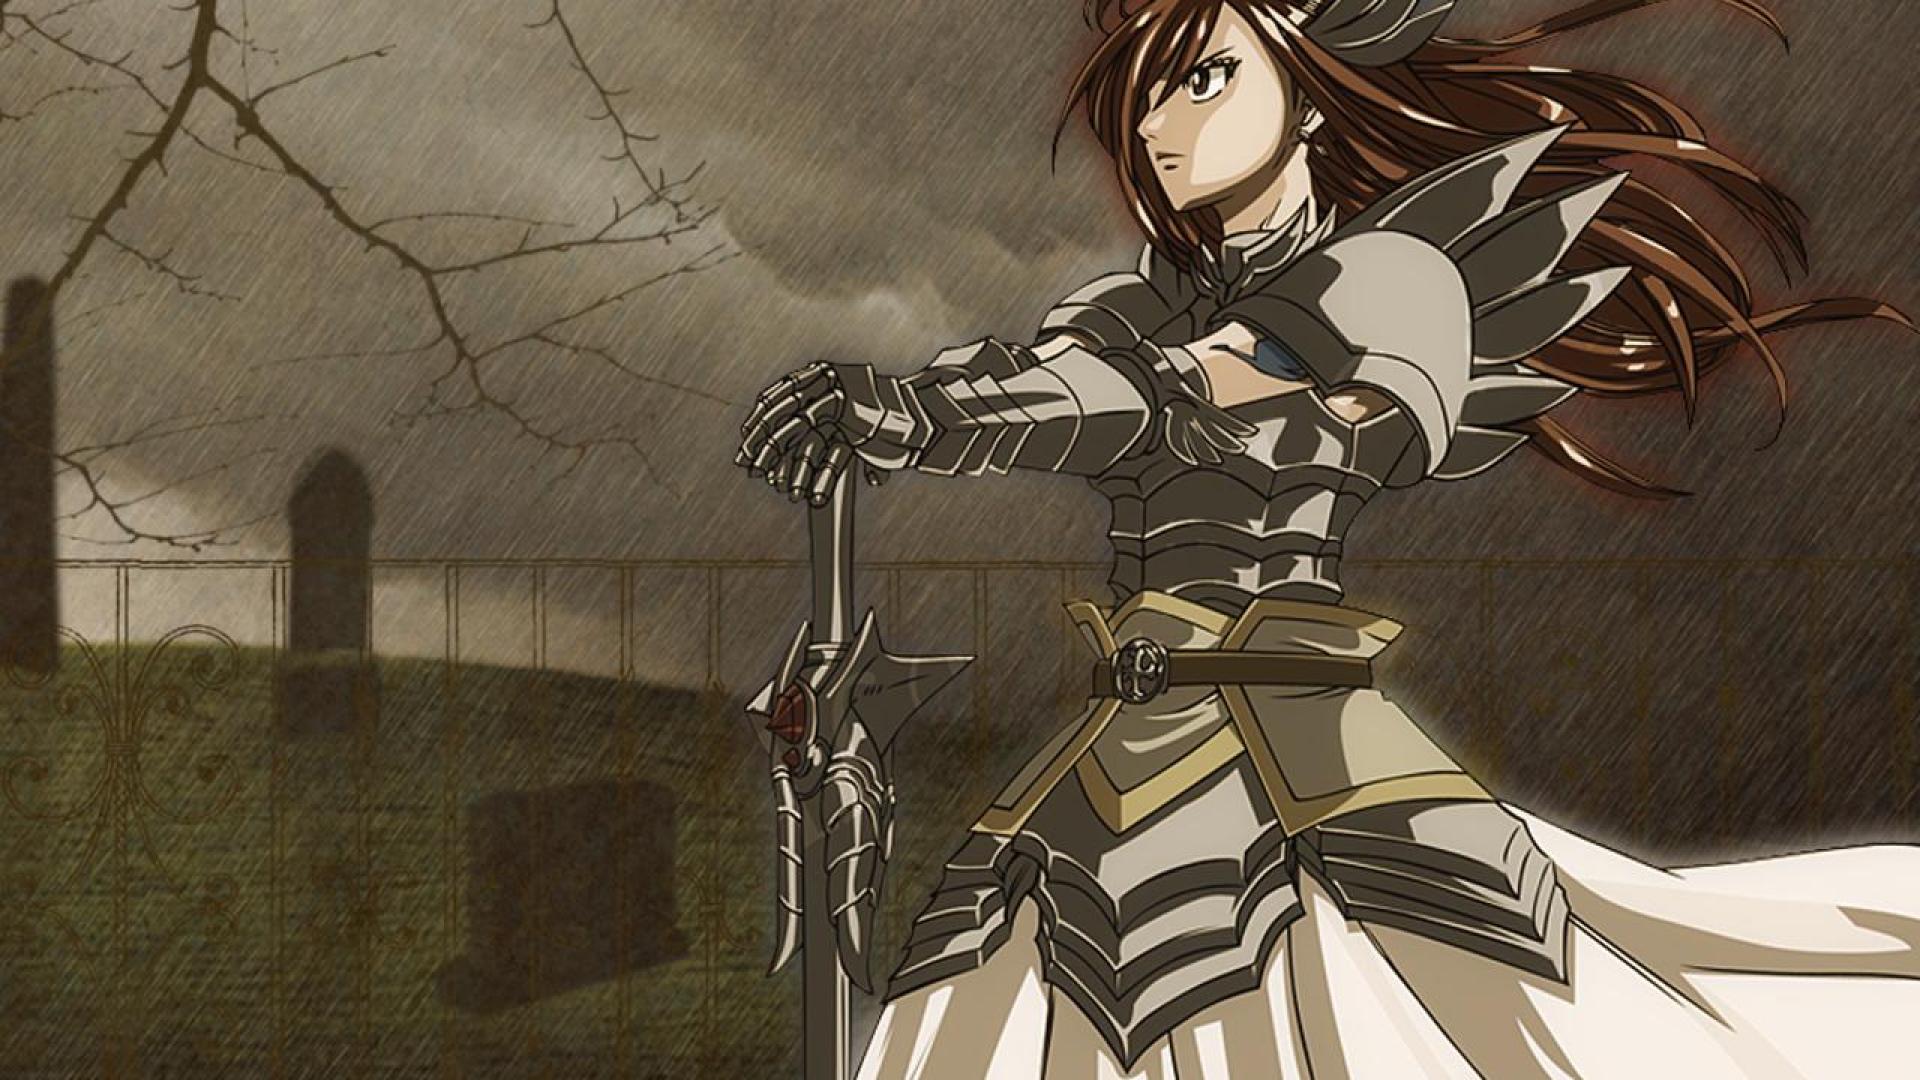 erza scarlet   154002   High Quality and Resolution Wallpapers on